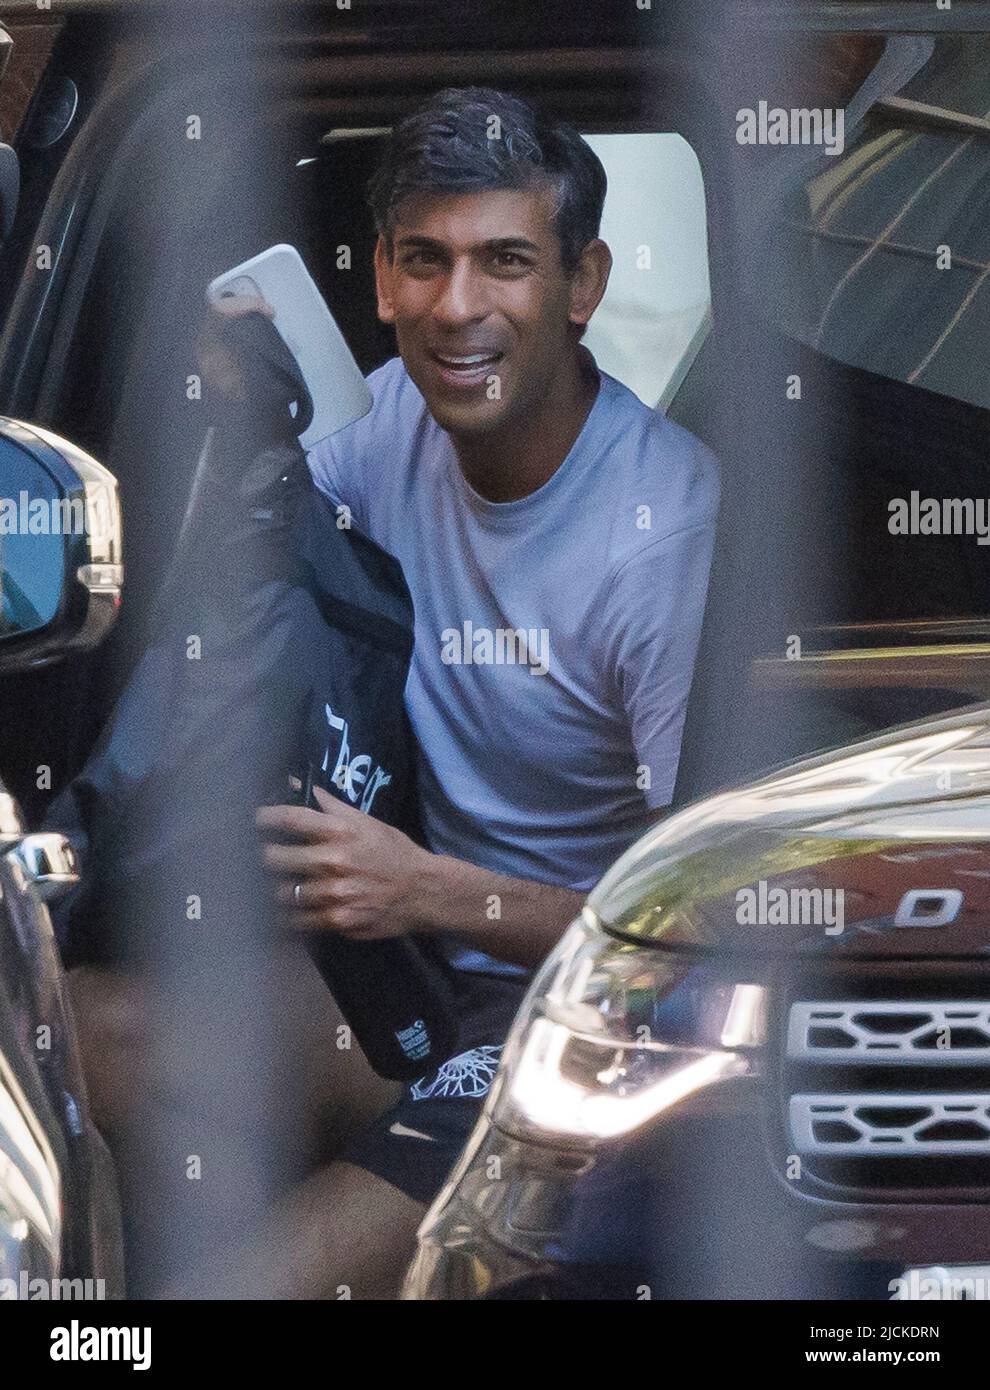 London, UK. 14th June, 2022. Chancellor RISHI SUNAK is seen smiling as he arrives at Downing Street in Westminster ahead of a Cabinet meeting. Photo credit: Ben Cawthra/Sipa USA **NO UK SALES** Credit: Sipa USA/Alamy Live News Stock Photo